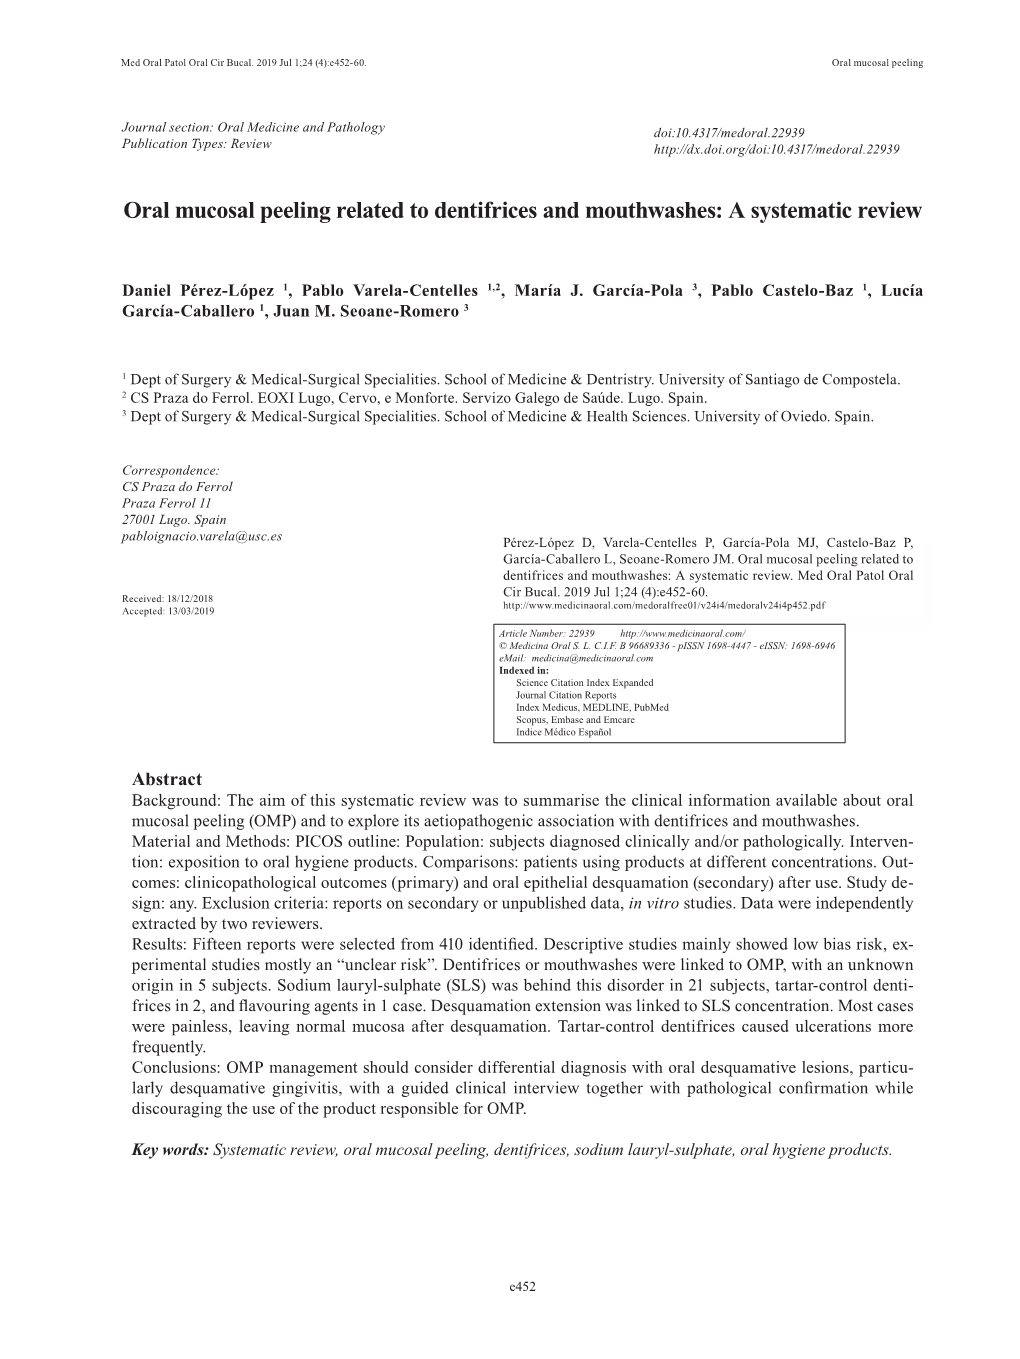 Oral Mucosal Peeling Related to Dentifrices and Mouthwashes: a Systematic Review